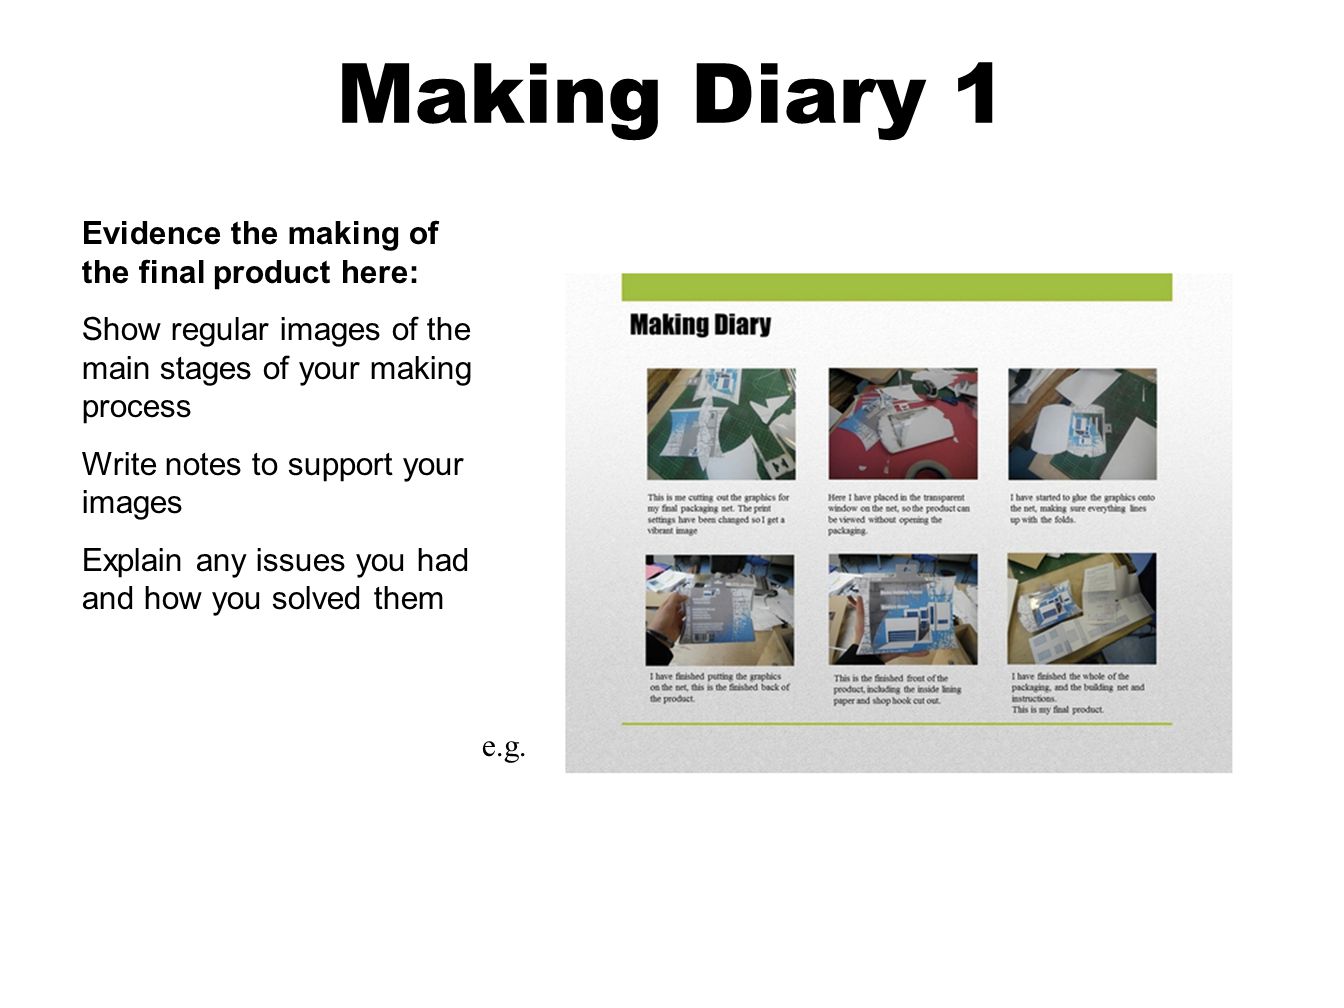 Making Diary 1 Evidence the making of the final product here: Show regular images of the main stages of your making process Write notes to support your images Explain any issues you had and how you solved them e.g.